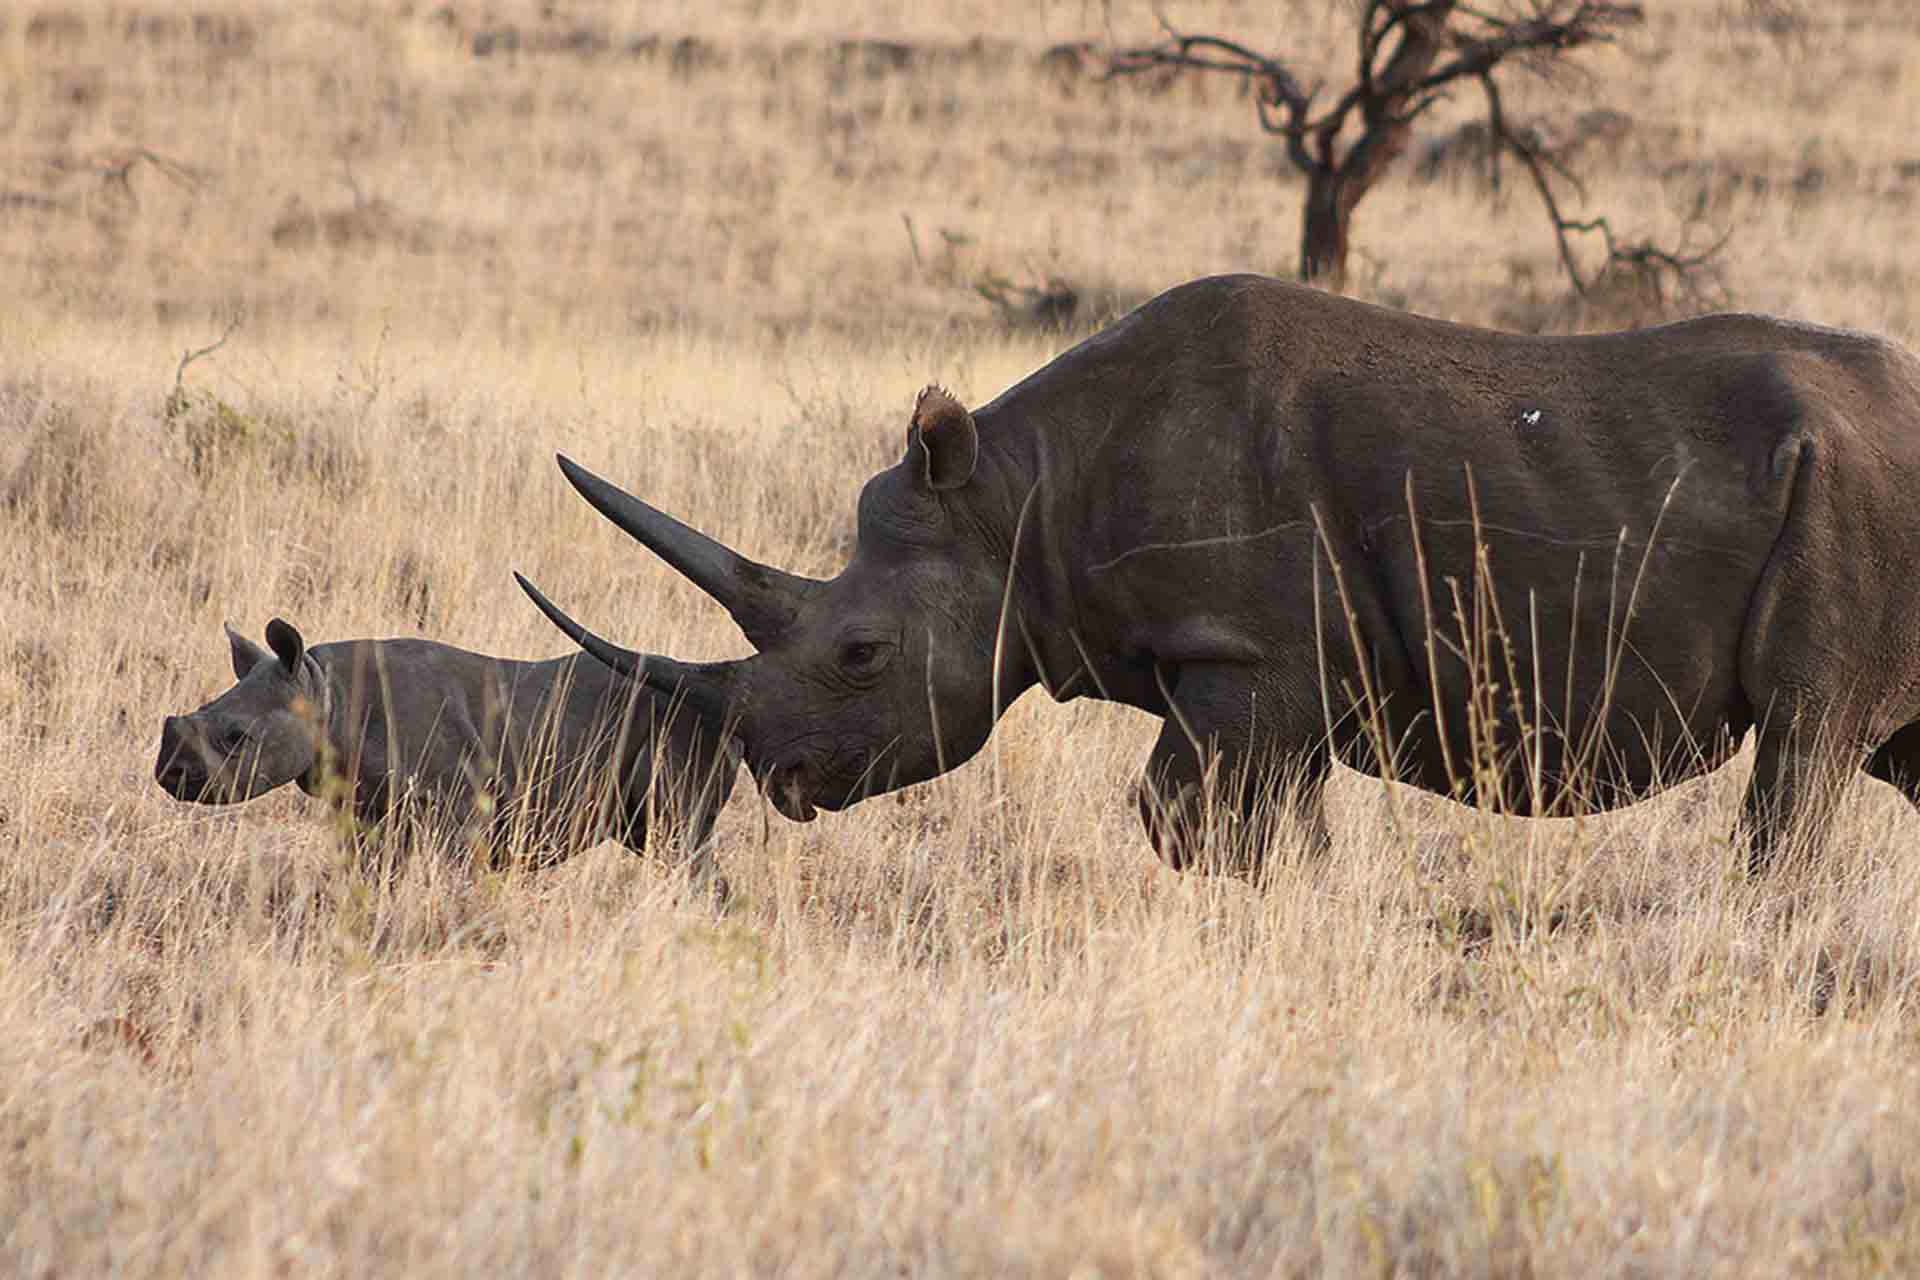 A black rhino mother and her baby in the Lewa Conservancy in Kenya.